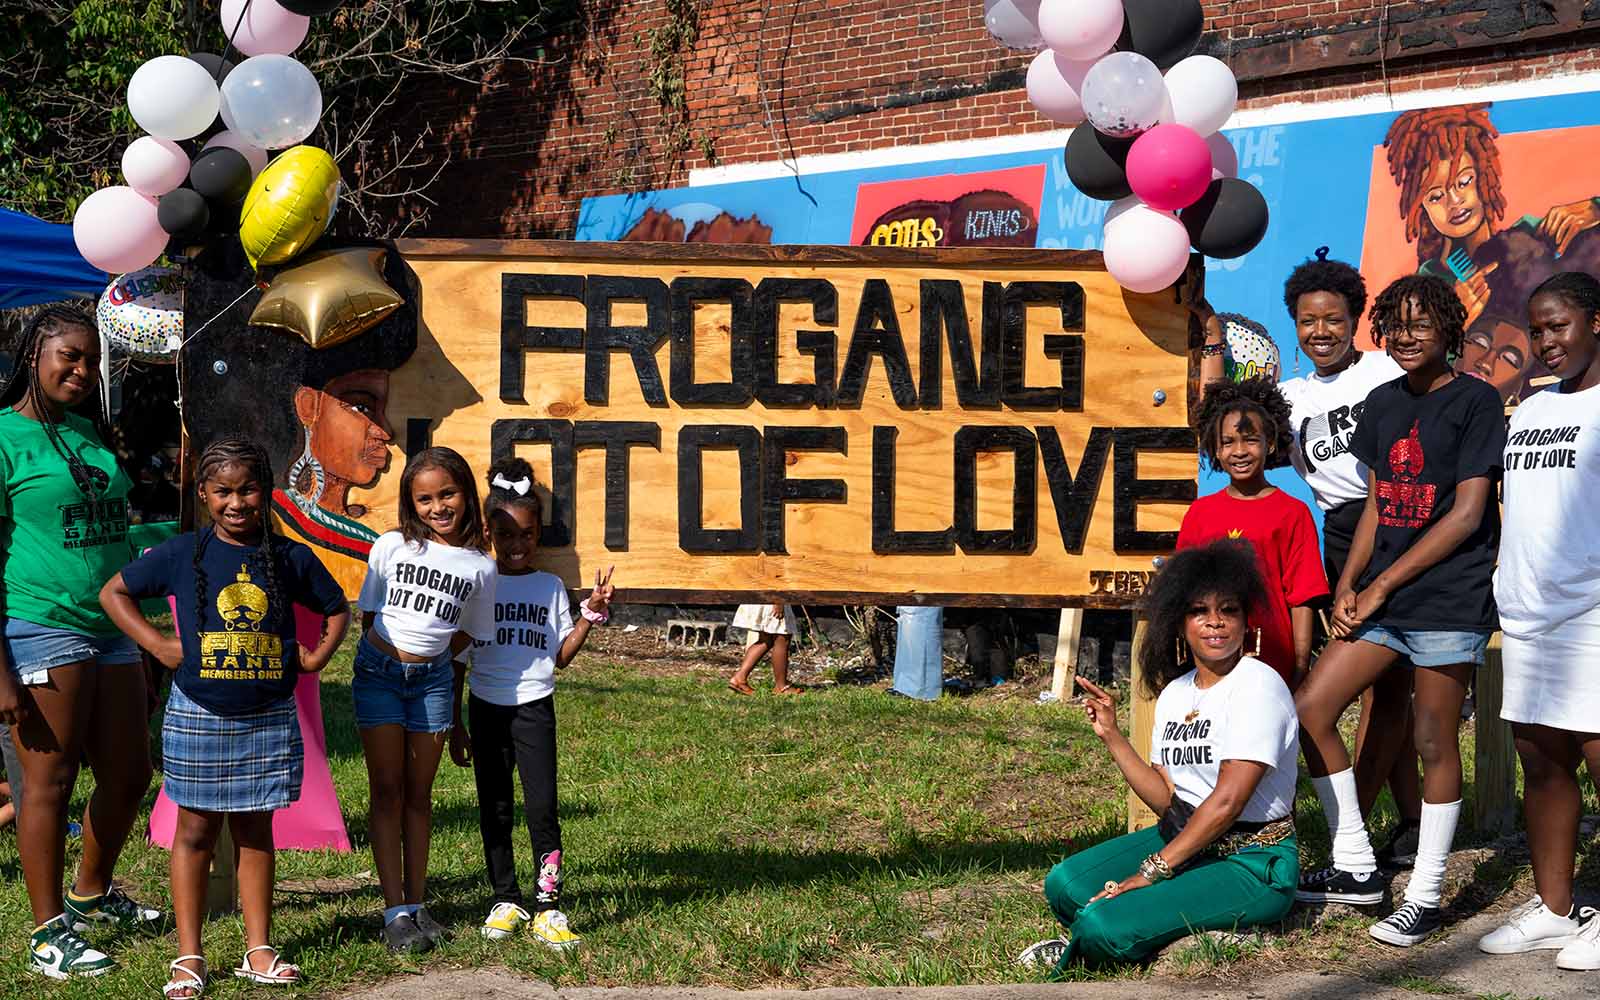 A group of young black women of a variety of ages with natural hair pose with a sign that reads "FROGANG LOT OF LOVE" with balloons on it.